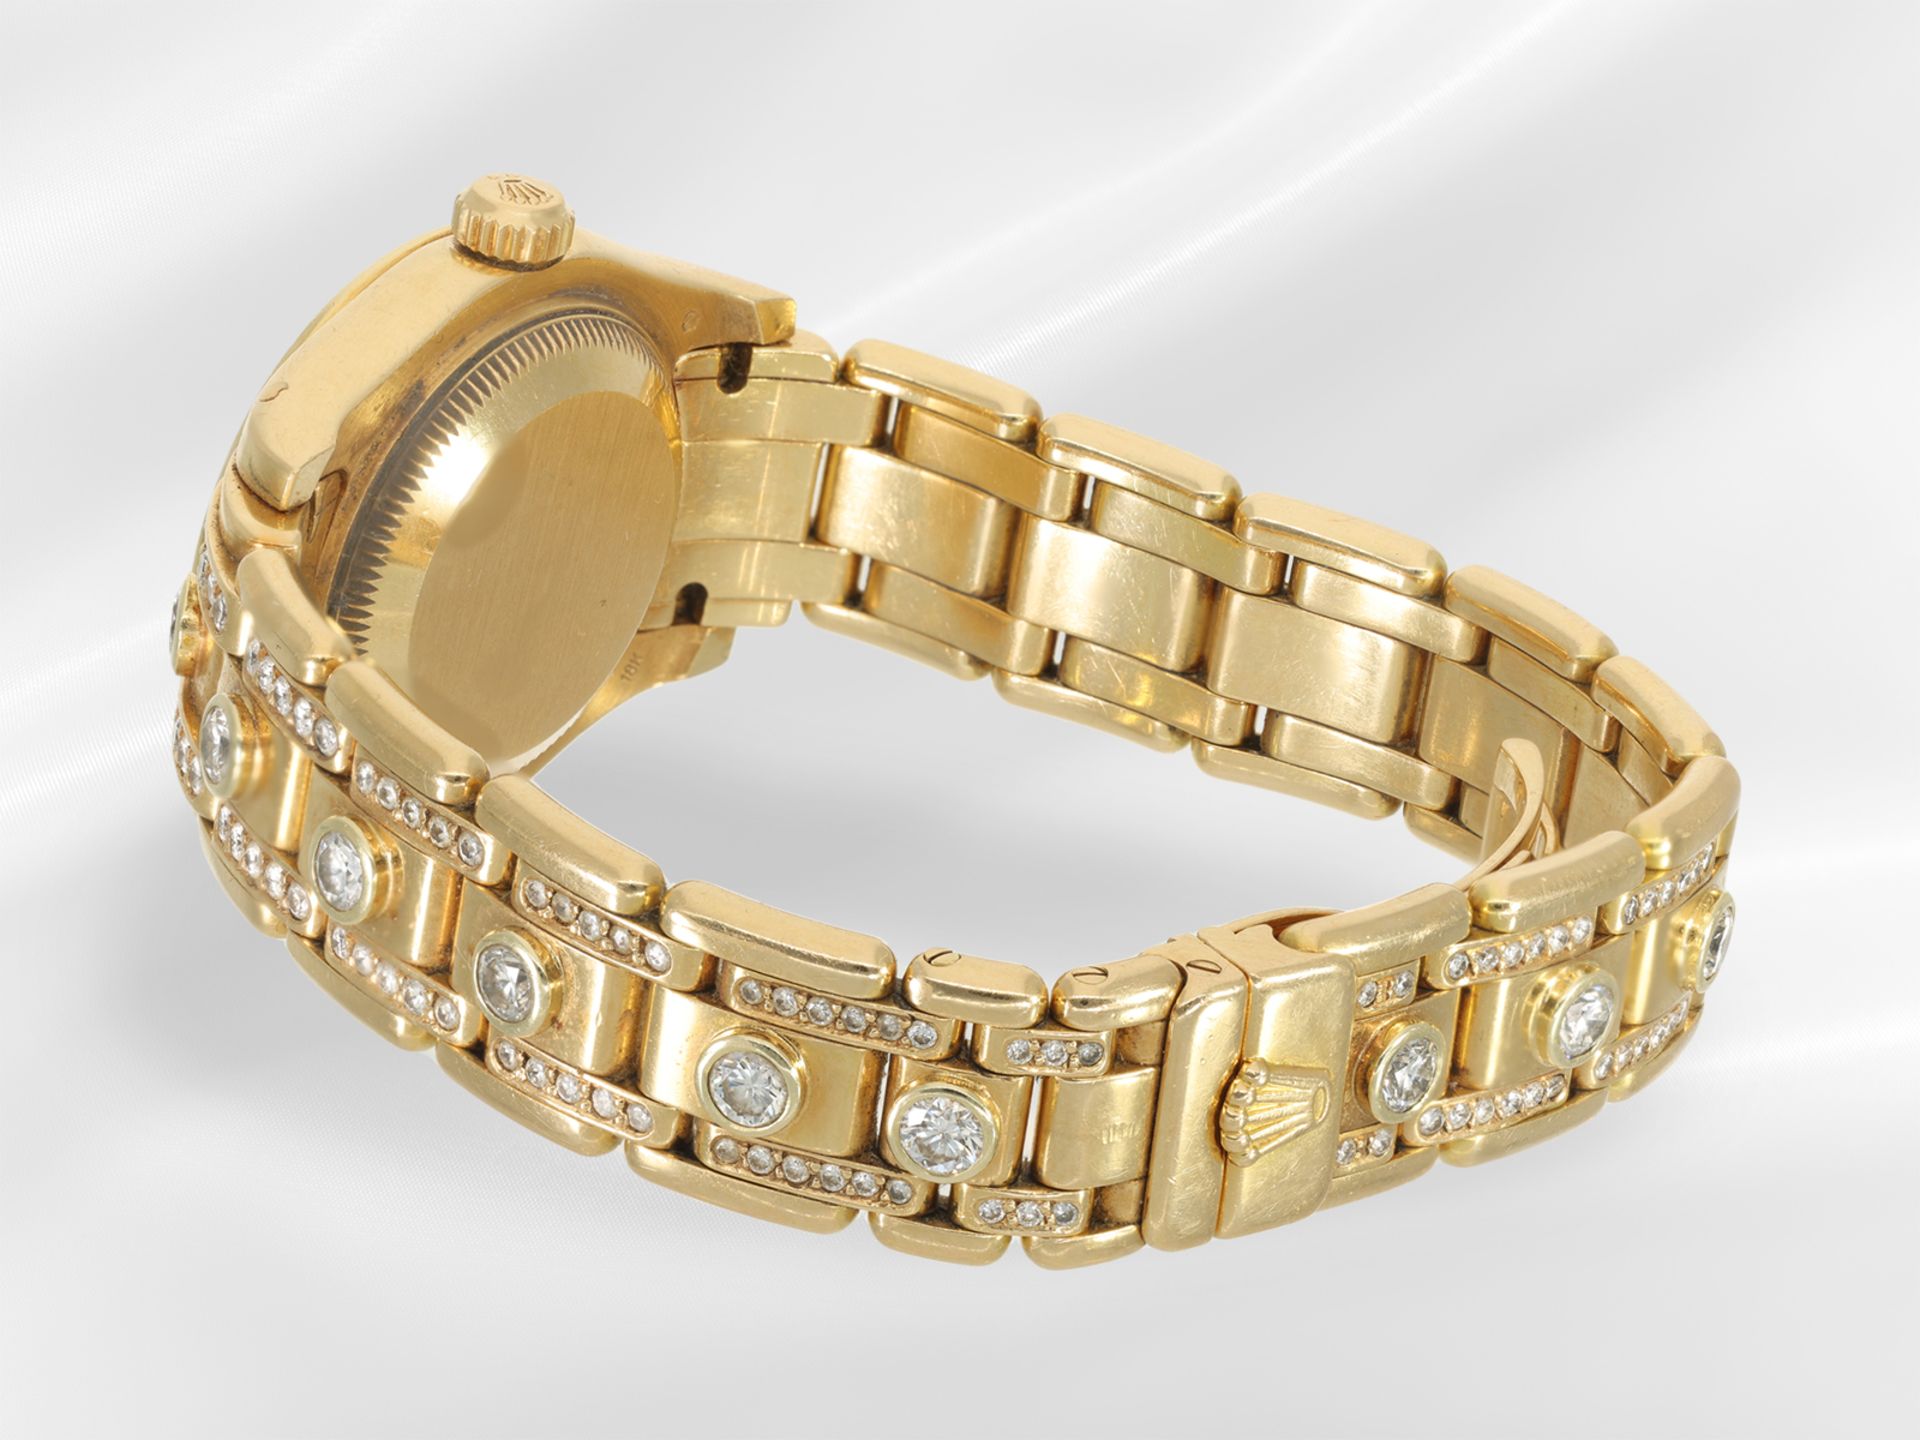 Wristwatch: wanted luxury ladies' watch Rolex Pearlmaster Ref.....with full brilliant-cut diamonds a - Image 5 of 6